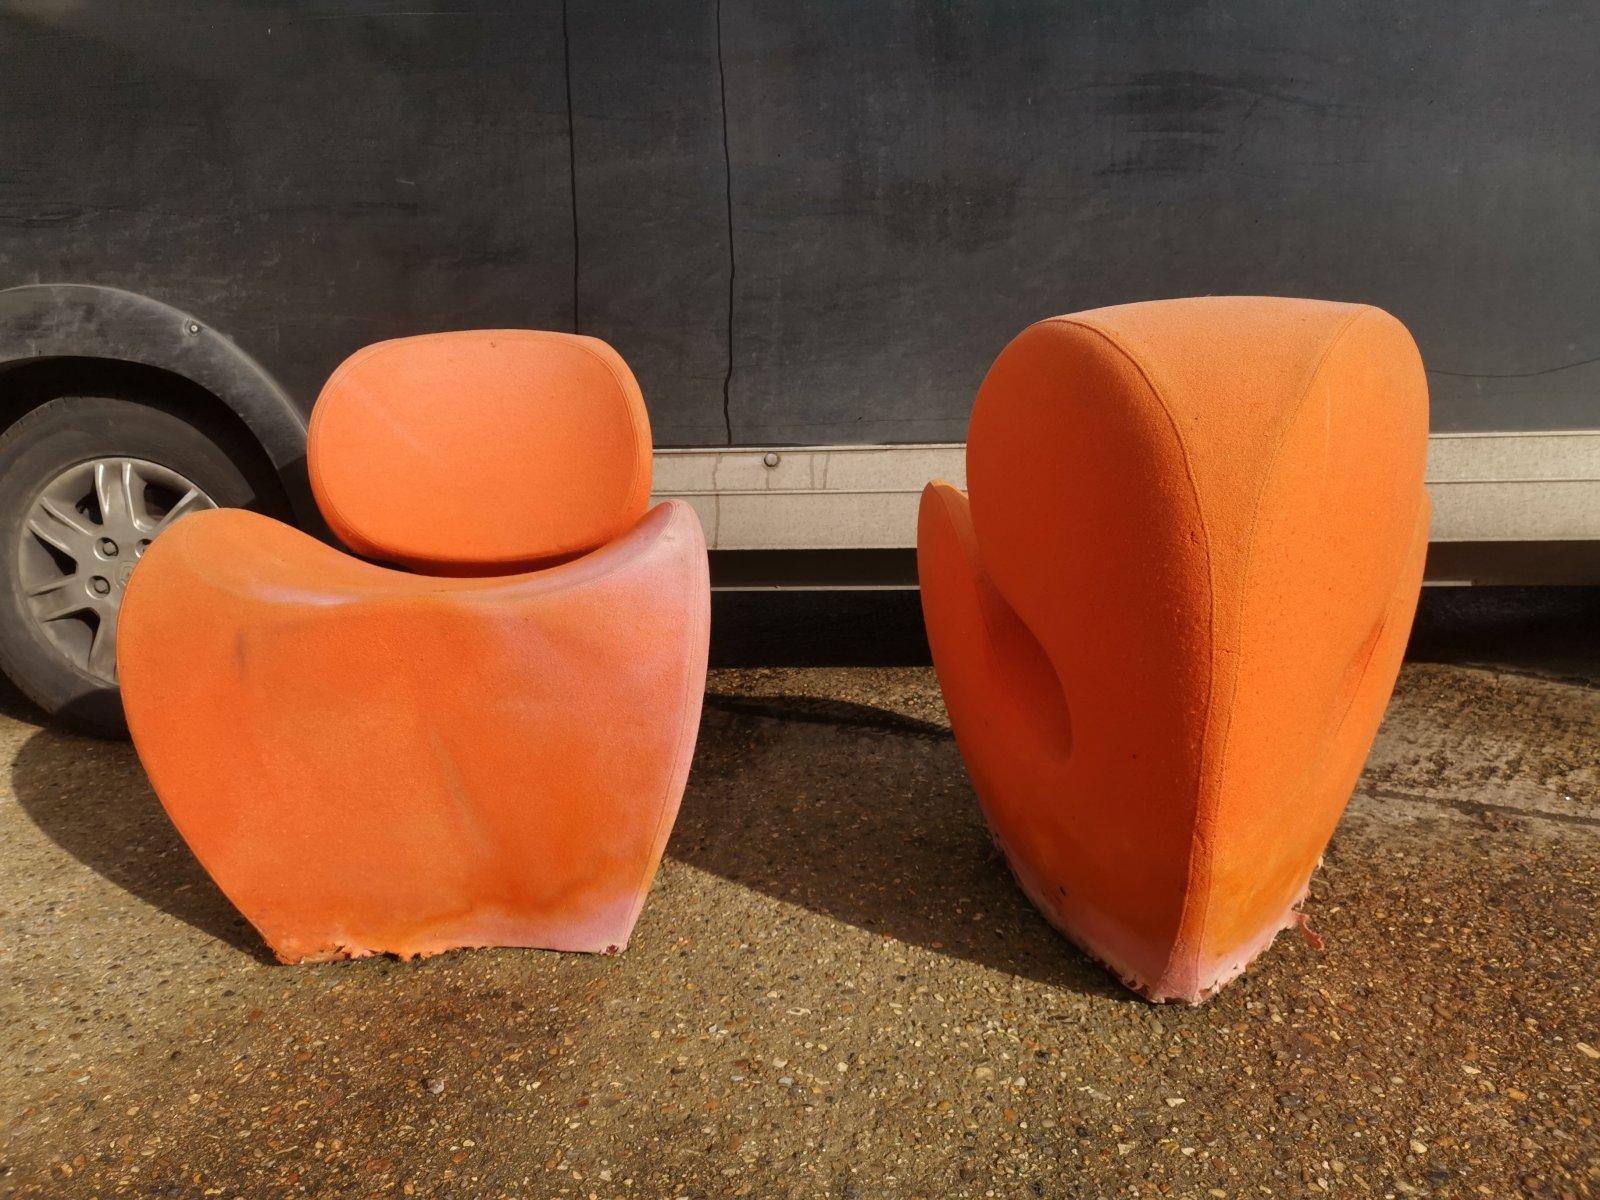 English Ron Arad circa 1991, Four Soft Big Heavy Orange Armchairs Made by Moroso, Italy For Sale